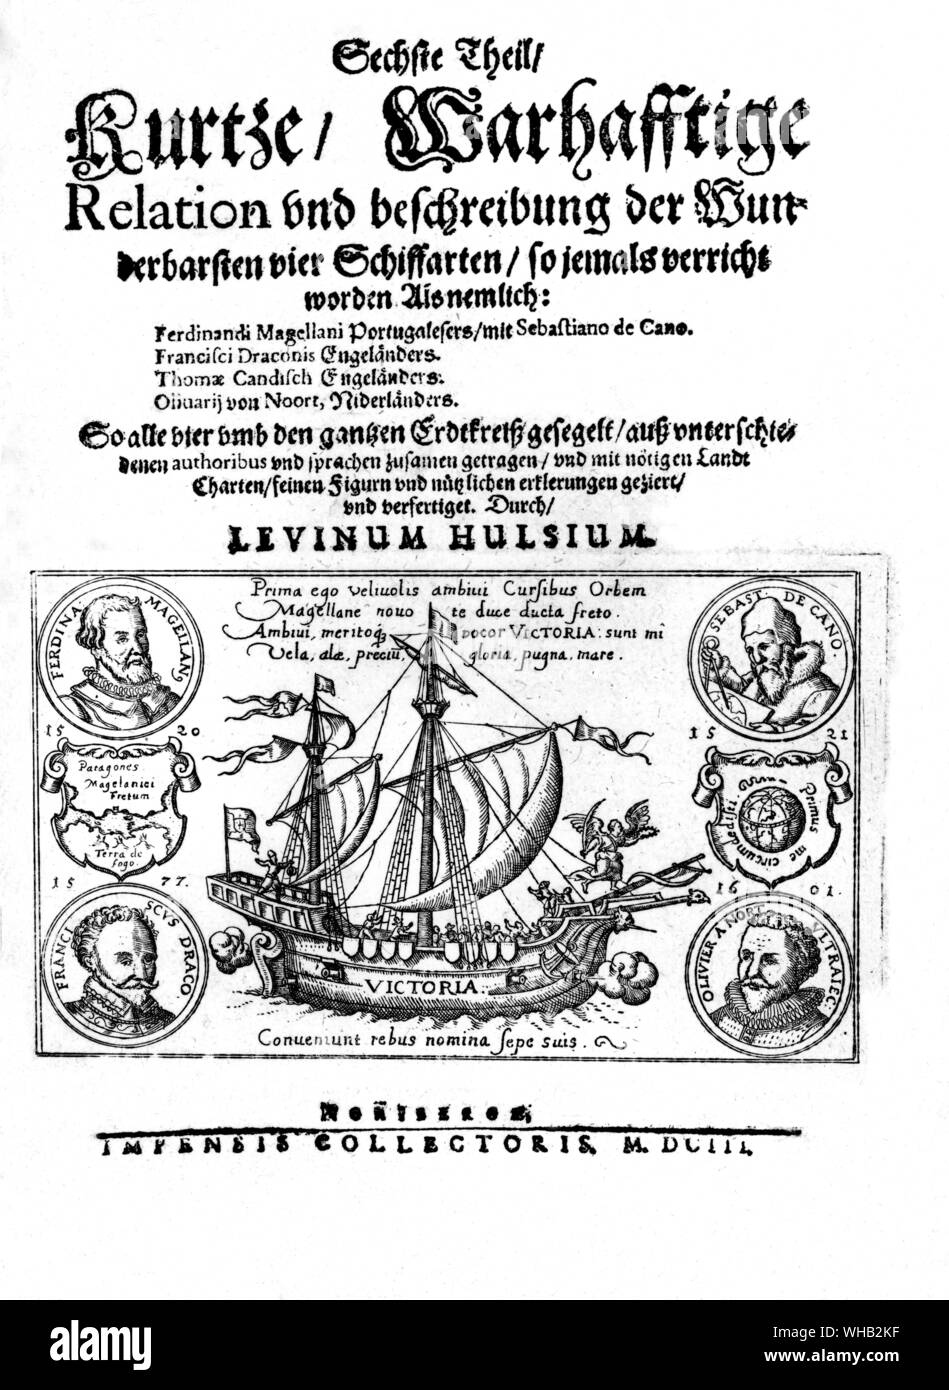 Ferdinand Magellan's Victoria -. Juan Sebastian Elcano, from Getaria, was the captain of the Victoria after Magellan's death during their circumnavigation of the world 1521/22.. The Victoria was one of the five ships of Ferdinand Magellan. It was named after the church of Santa María de la Victoria de Triana, where Magellan took an oath of allegiance to Charles of Spain.. She was the only ship to survive the circumnavigation of the globe of 1519 to 1522. Only 18 of the 265 crew that the expedition started with survived the trip. Magellan himself had been killed in the Philippines.. Stock Photo